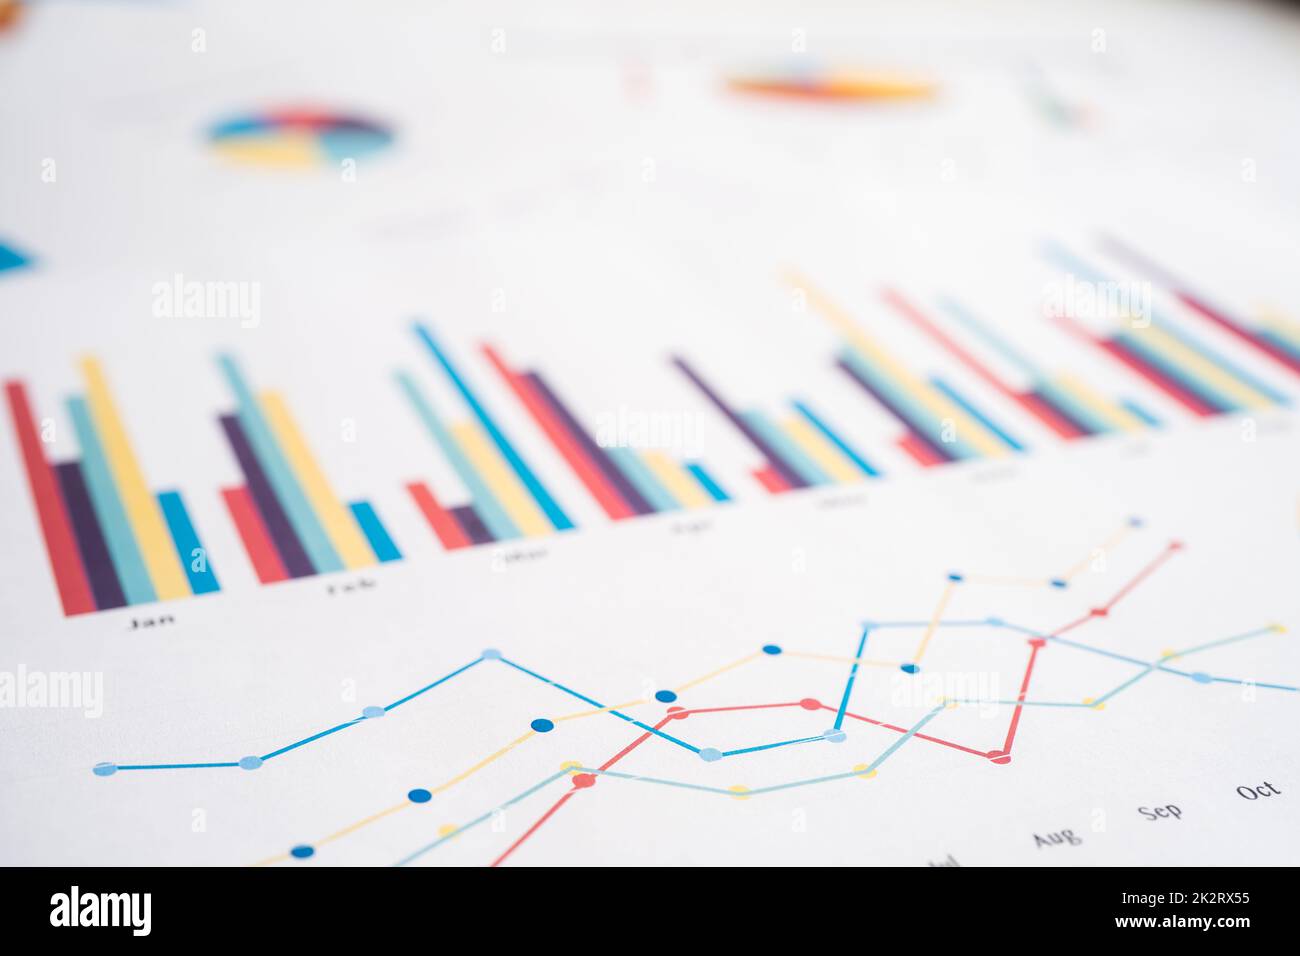 chart or graph paper. Financial, account, statistics and business data concept. Stock Photo